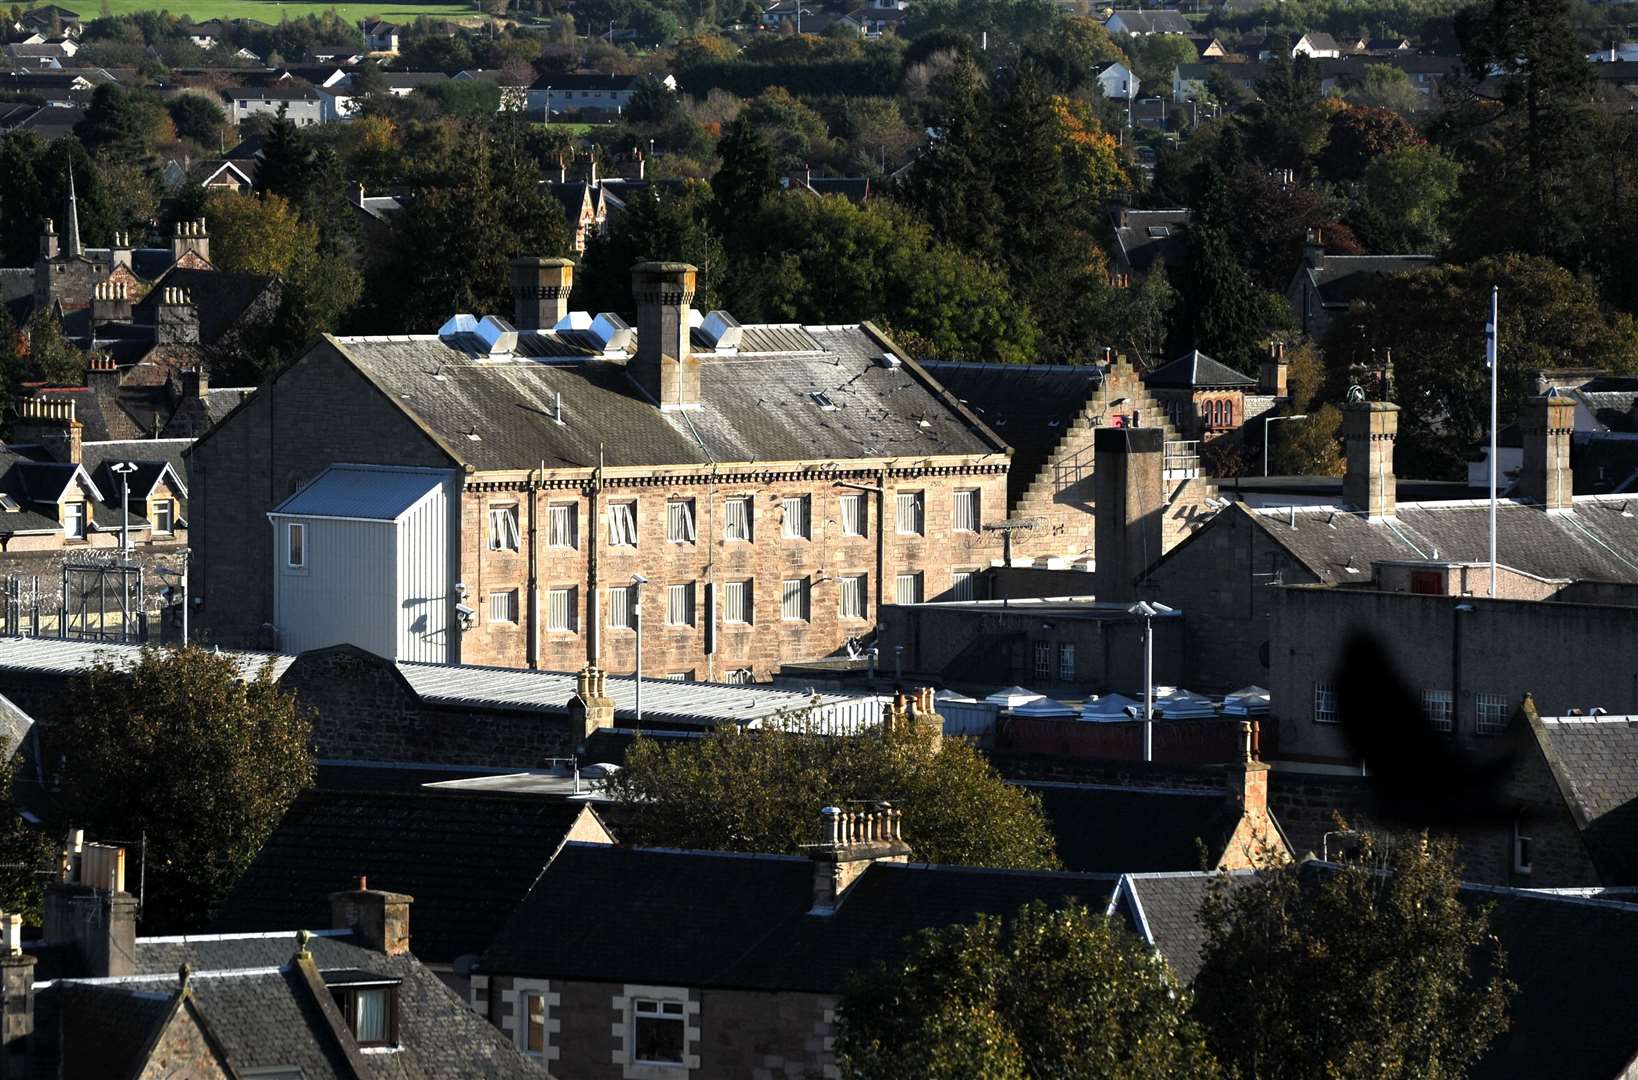 Porterfield Prison in Inverness, where the two Covid cases were confirmed.